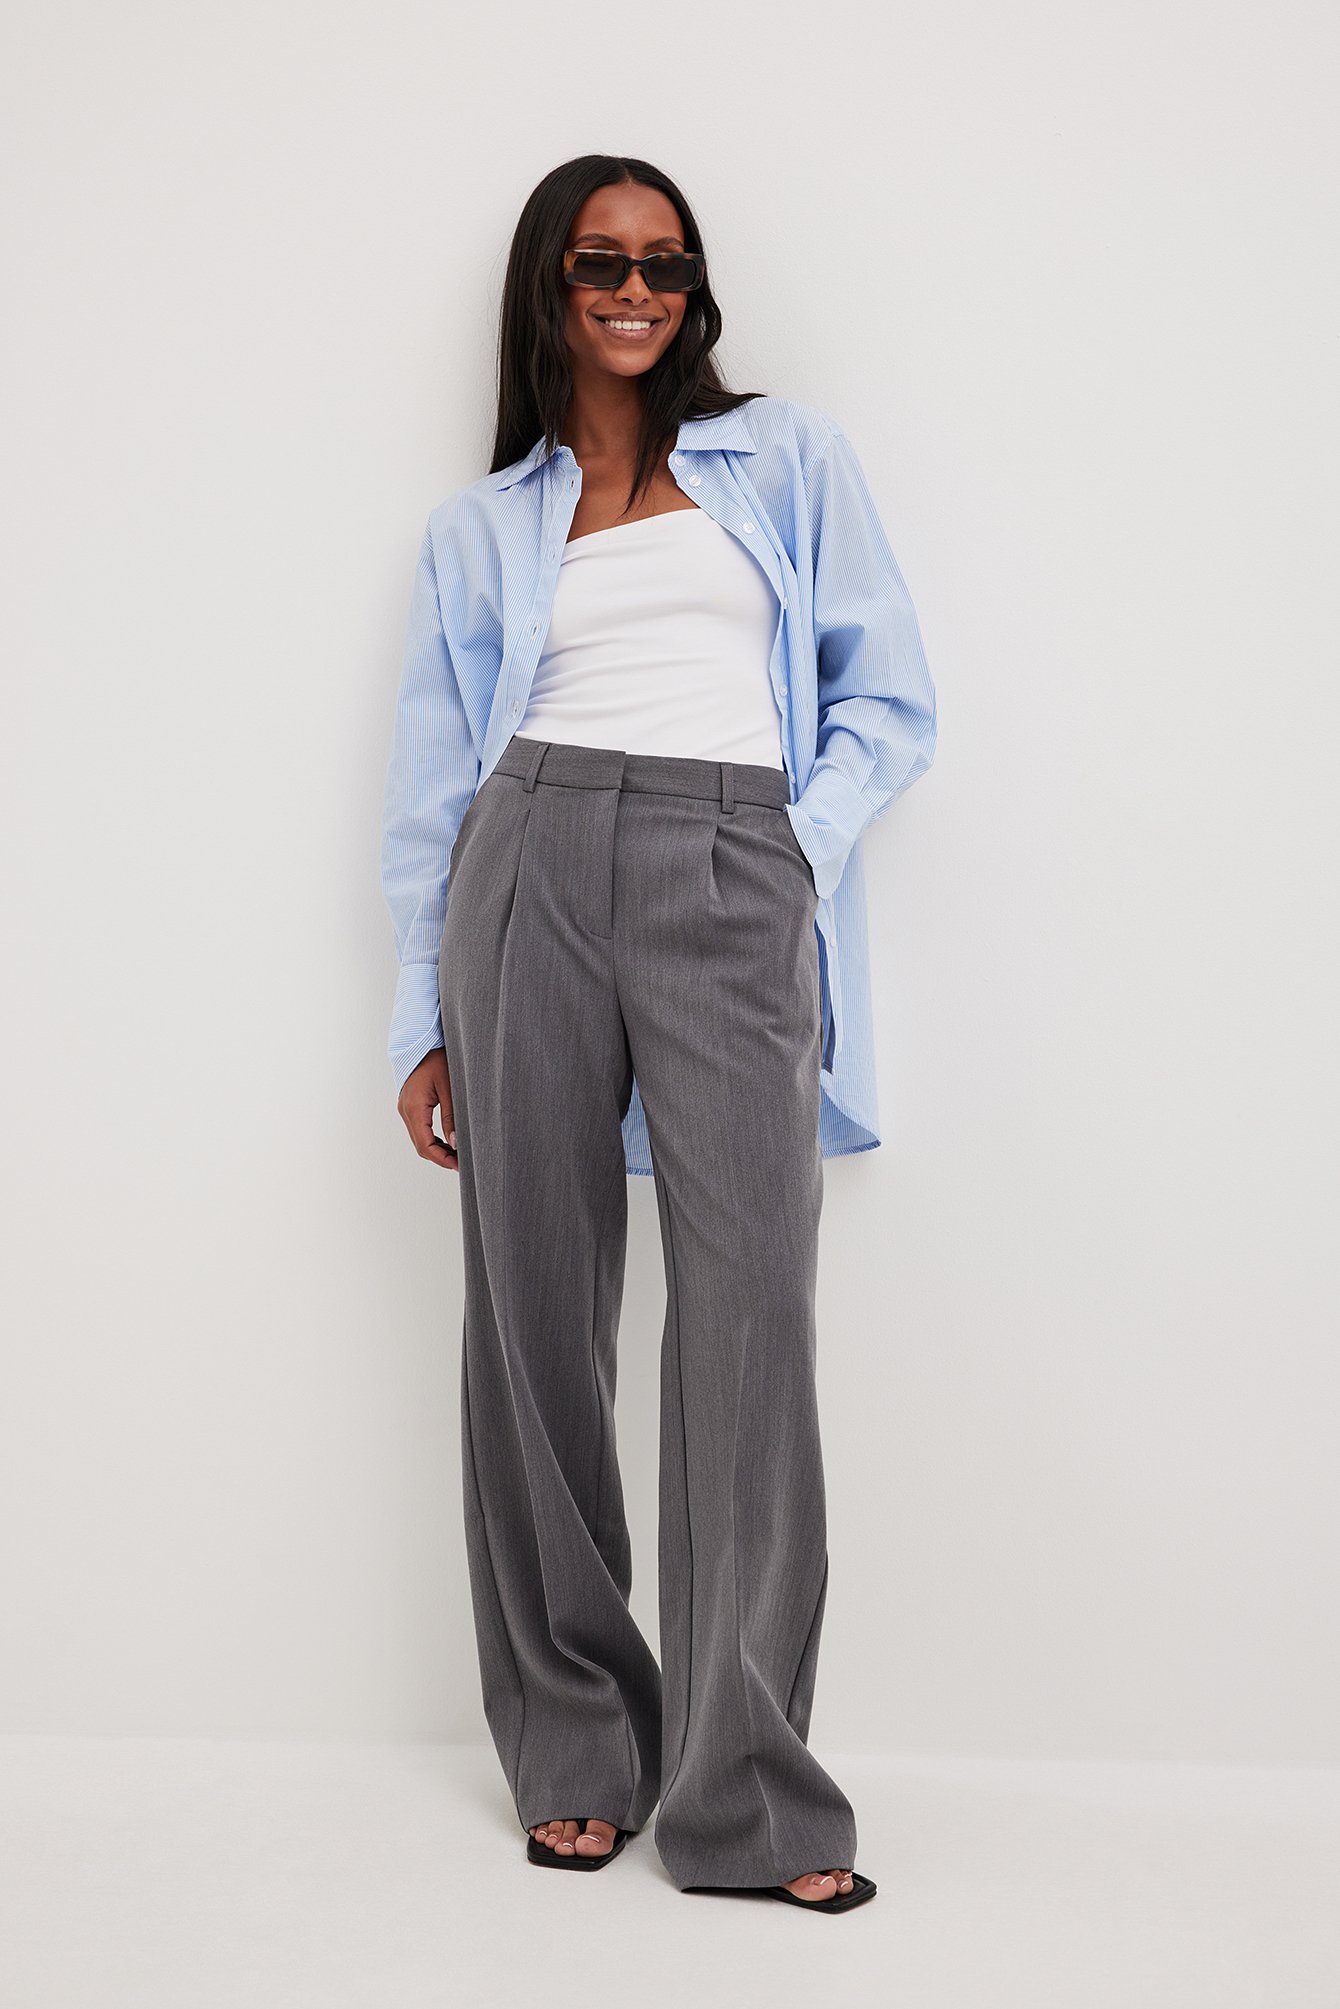 The Slouchy Trouser Trend That We Saw Everywhere at LFW  Who What Wear UK